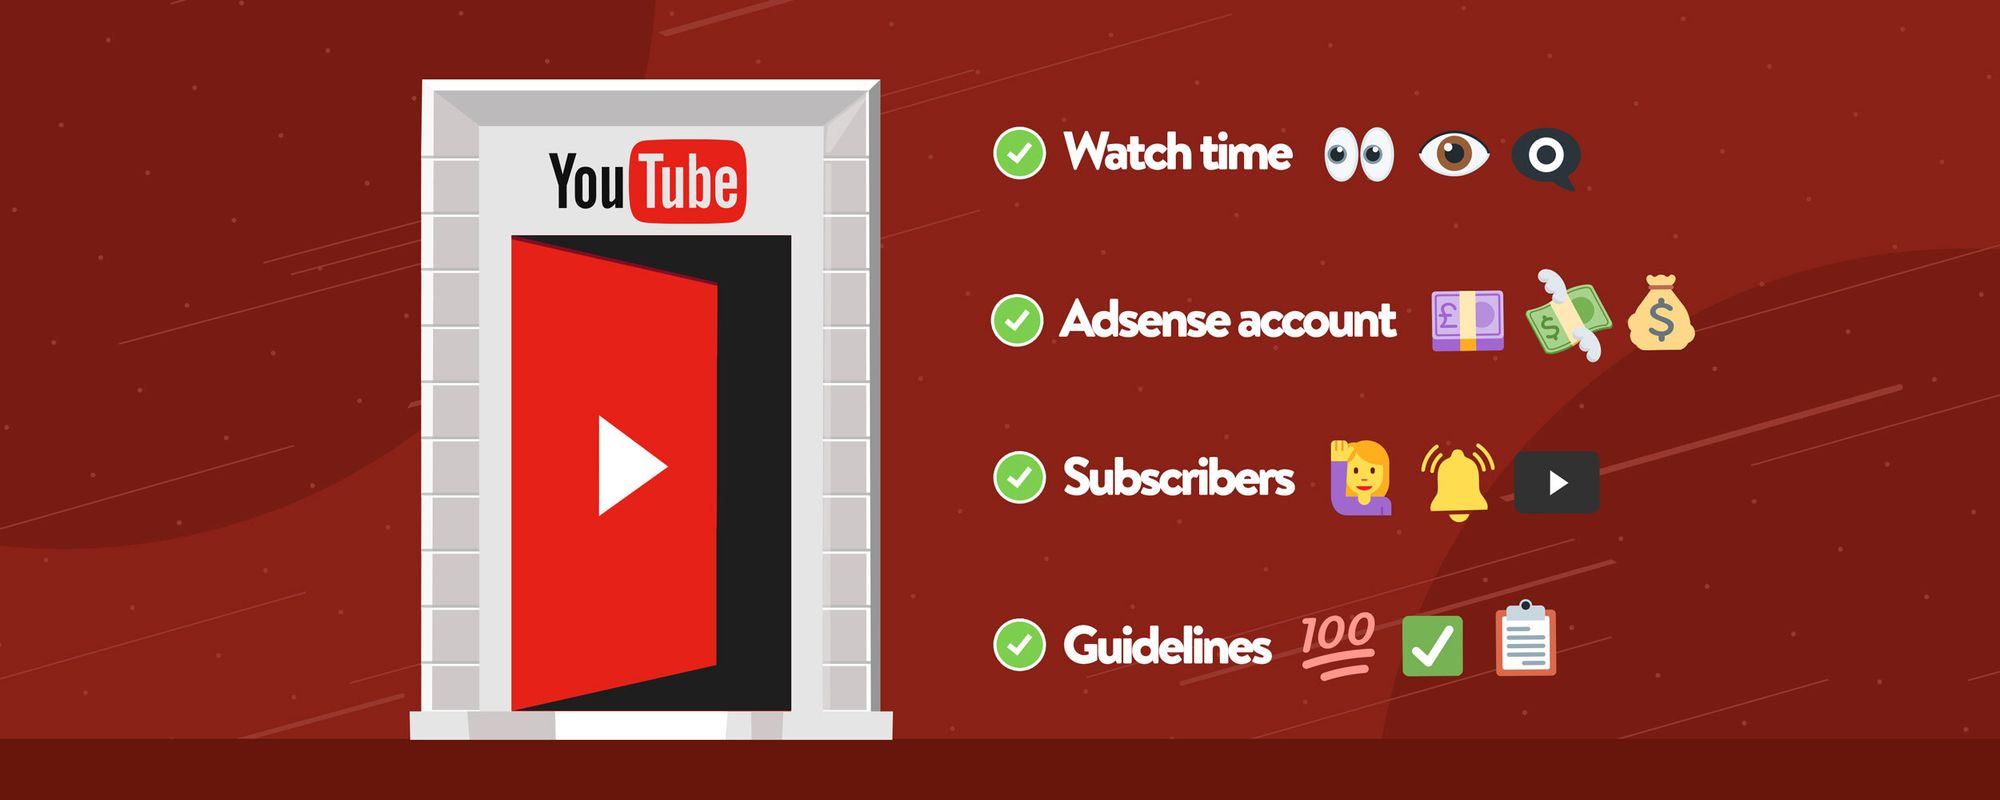 Checklist of different requirements creators must meet to join the YouTube Partner Program.